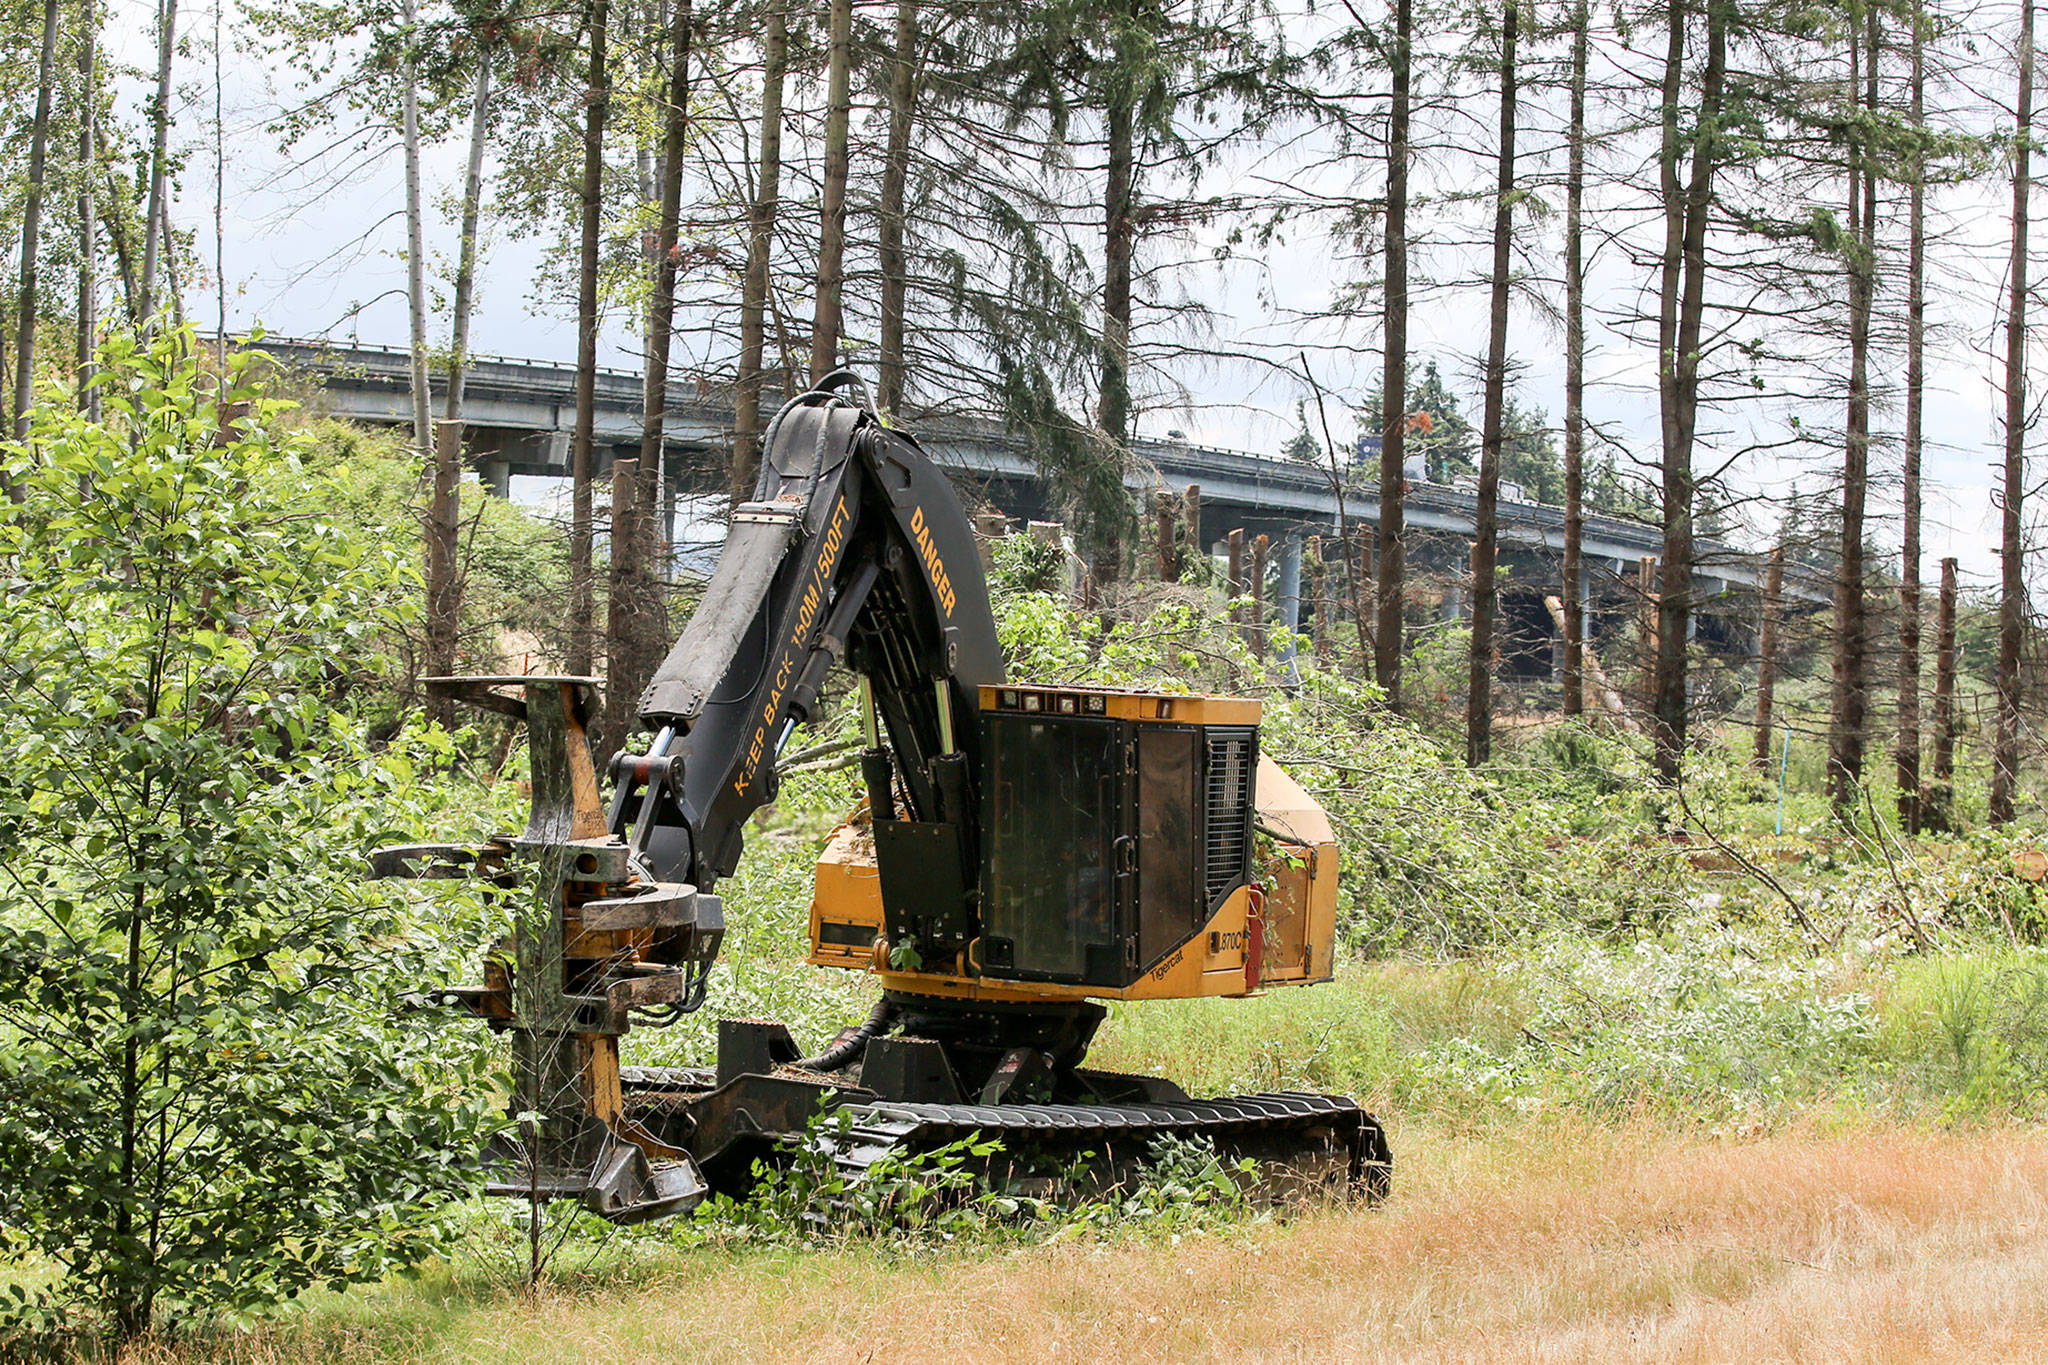 Crews work to clear a grove of trees in the shadow of I-5 on SR529 in Marysville to aid in salmon habitat restoration Monday. (Kevin Clark / The Herald)